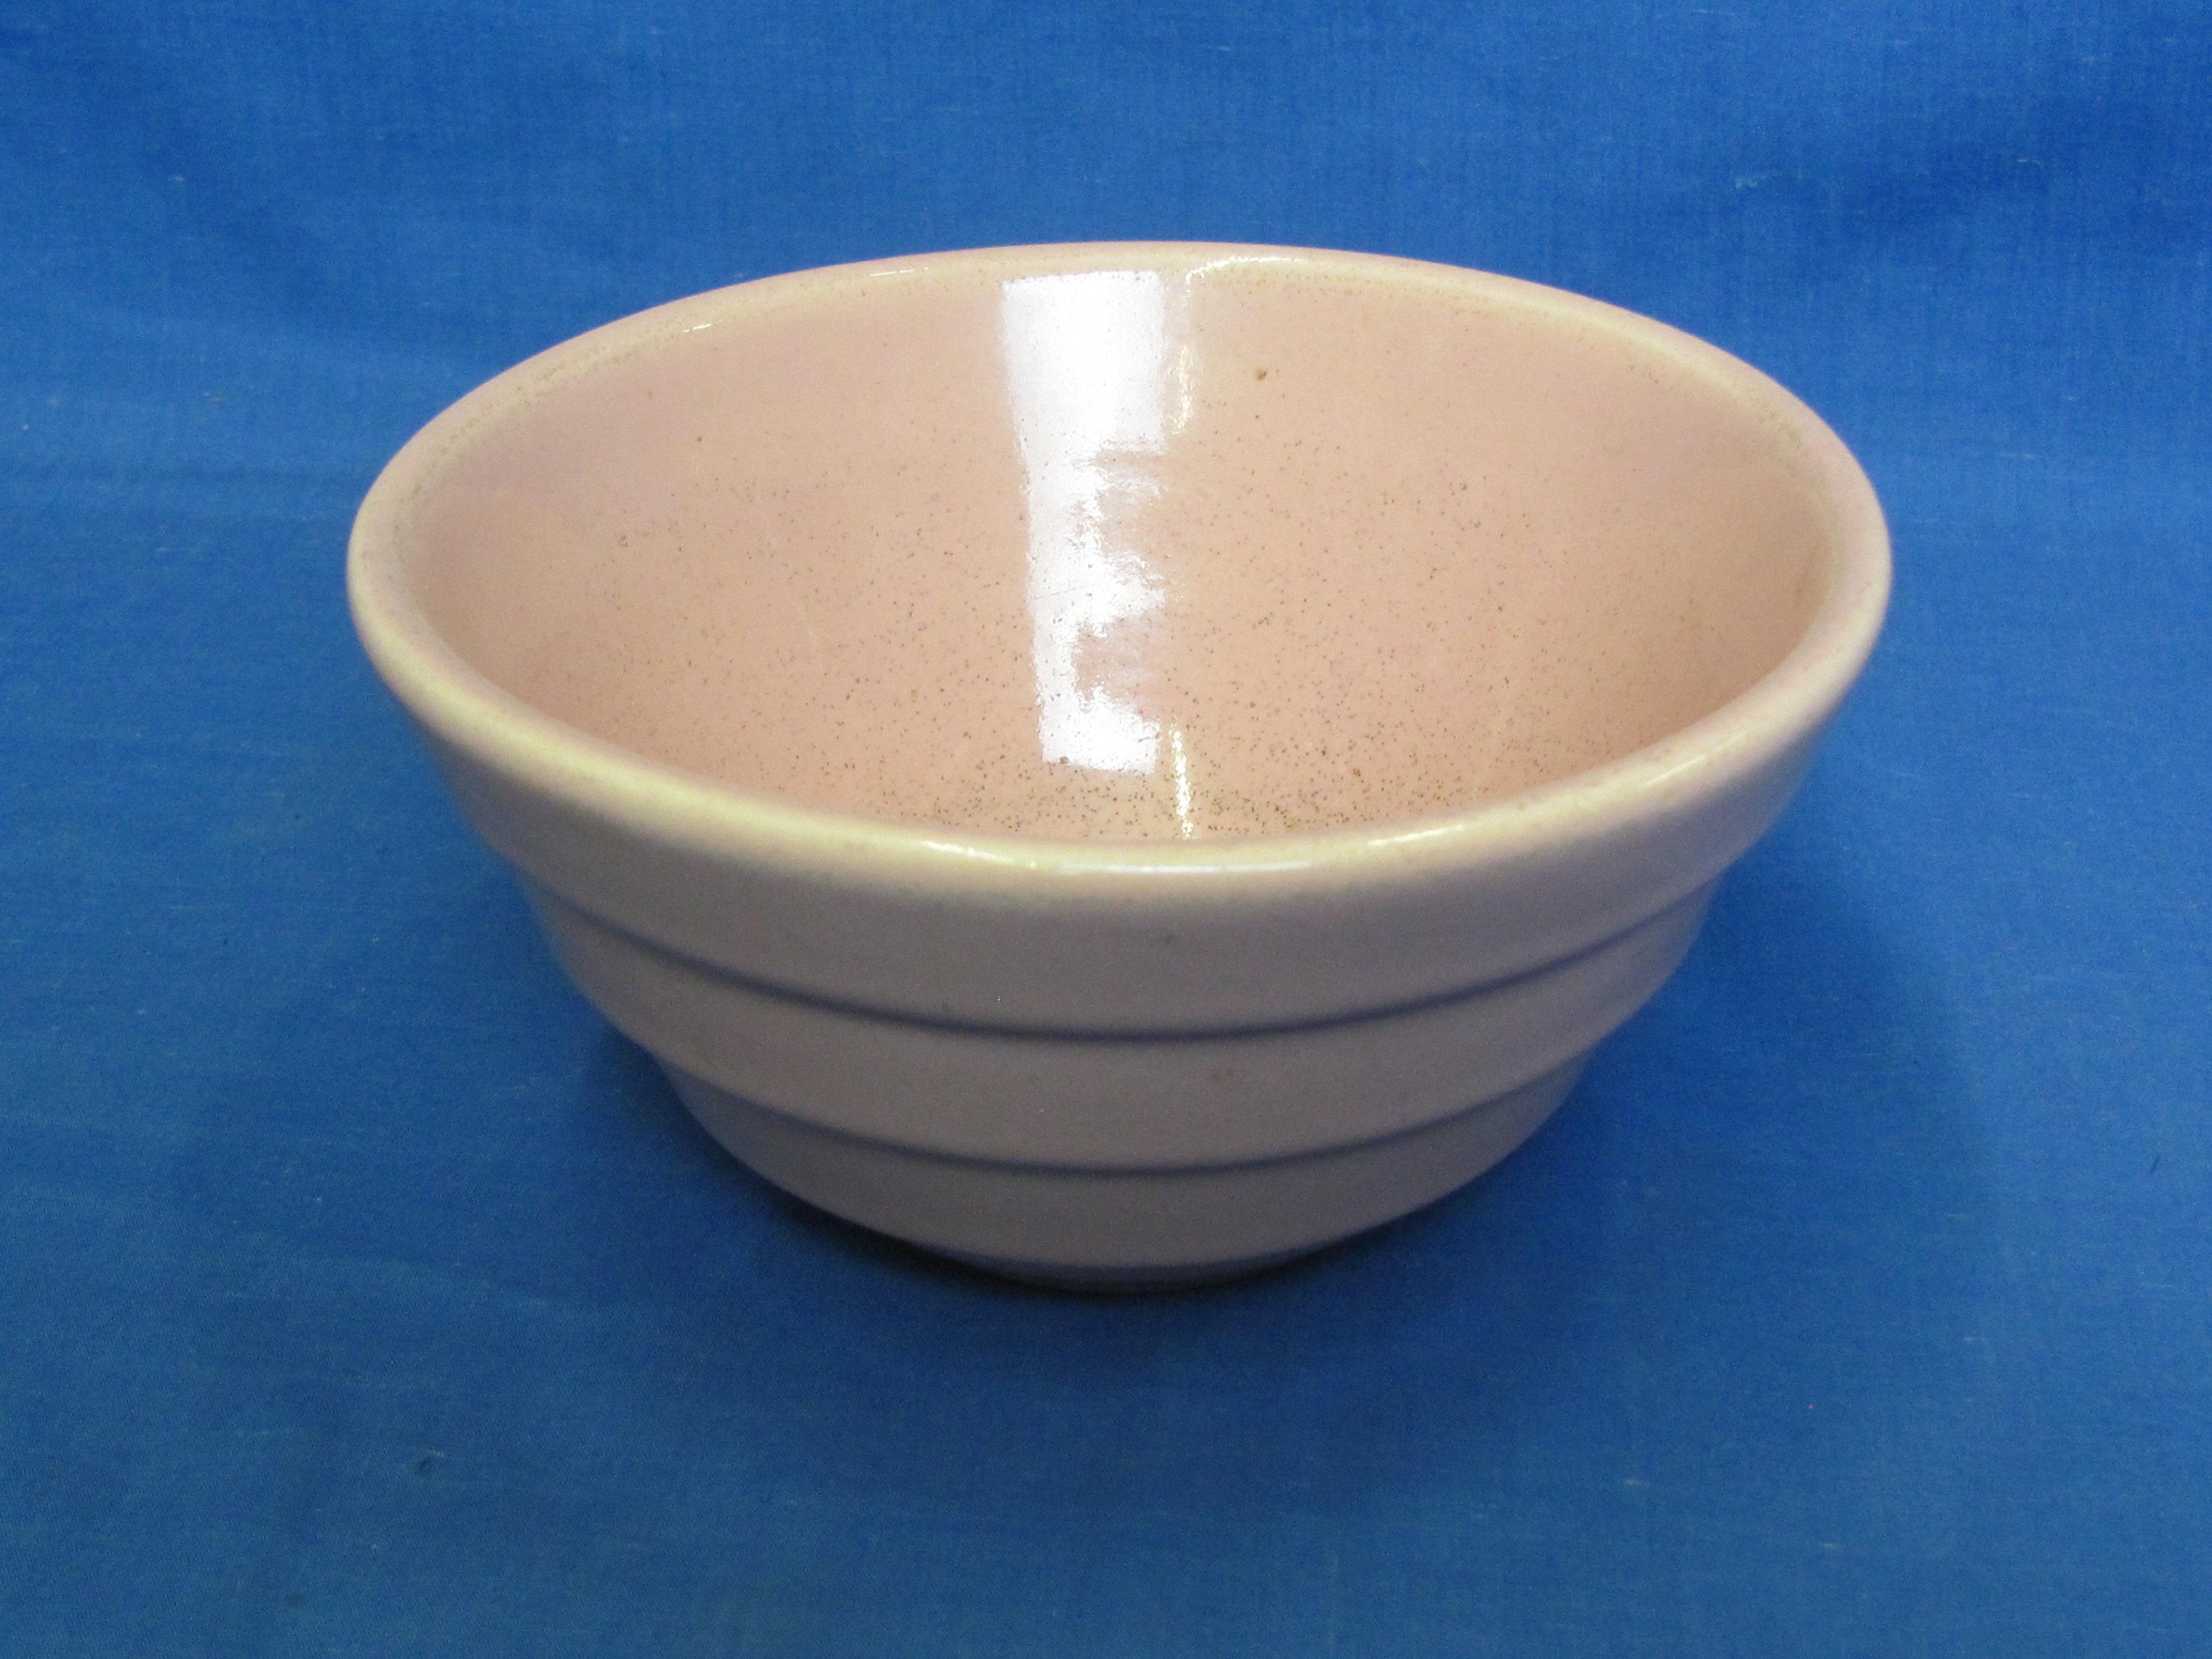 Pale Pink Ceramic Bowl with Rings Around It – Speckled Inside – Impressed “USA 30” -